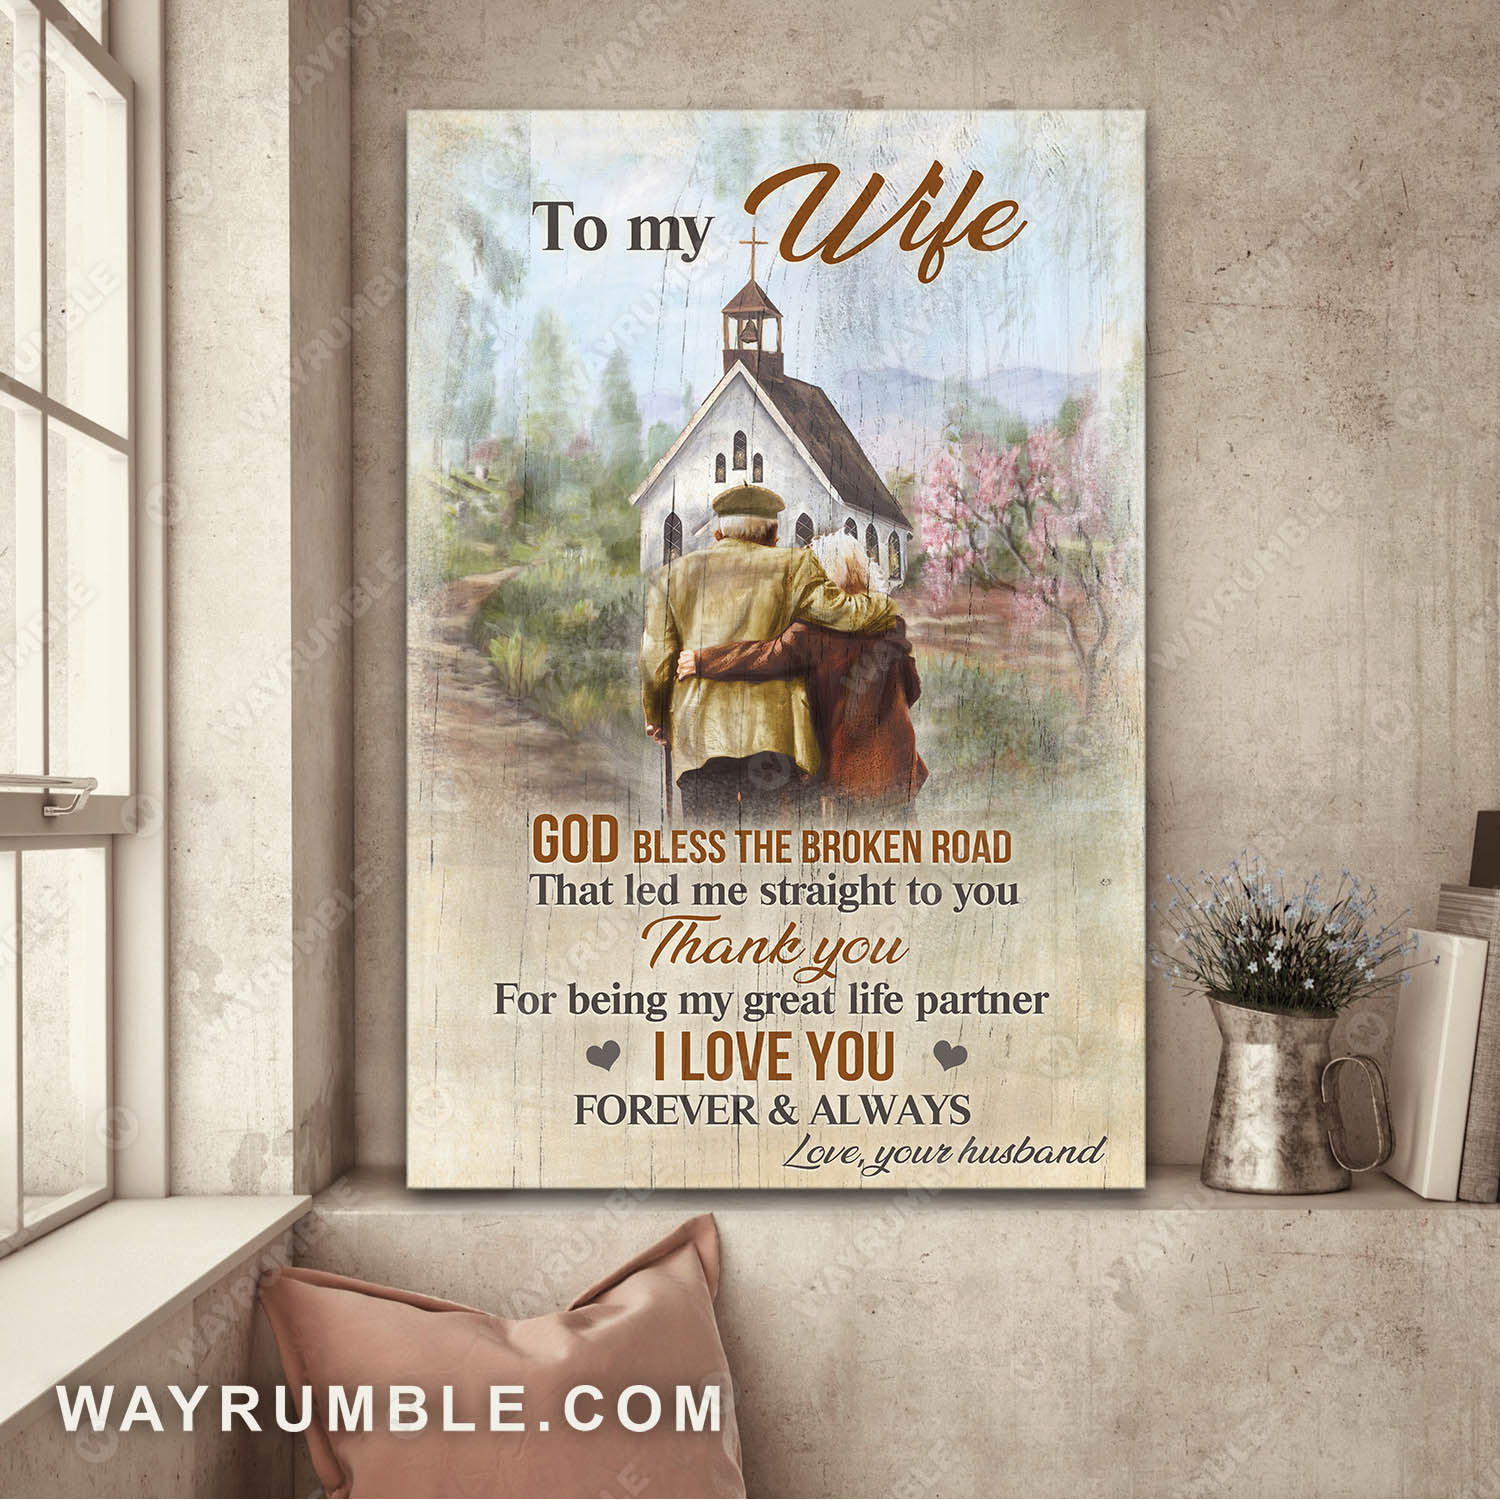 To my wife, Church on the hill, Path-way, Old couple in love, God bless the broken road that led me to you - Couple Portrait Canvas Prints, Wall Art